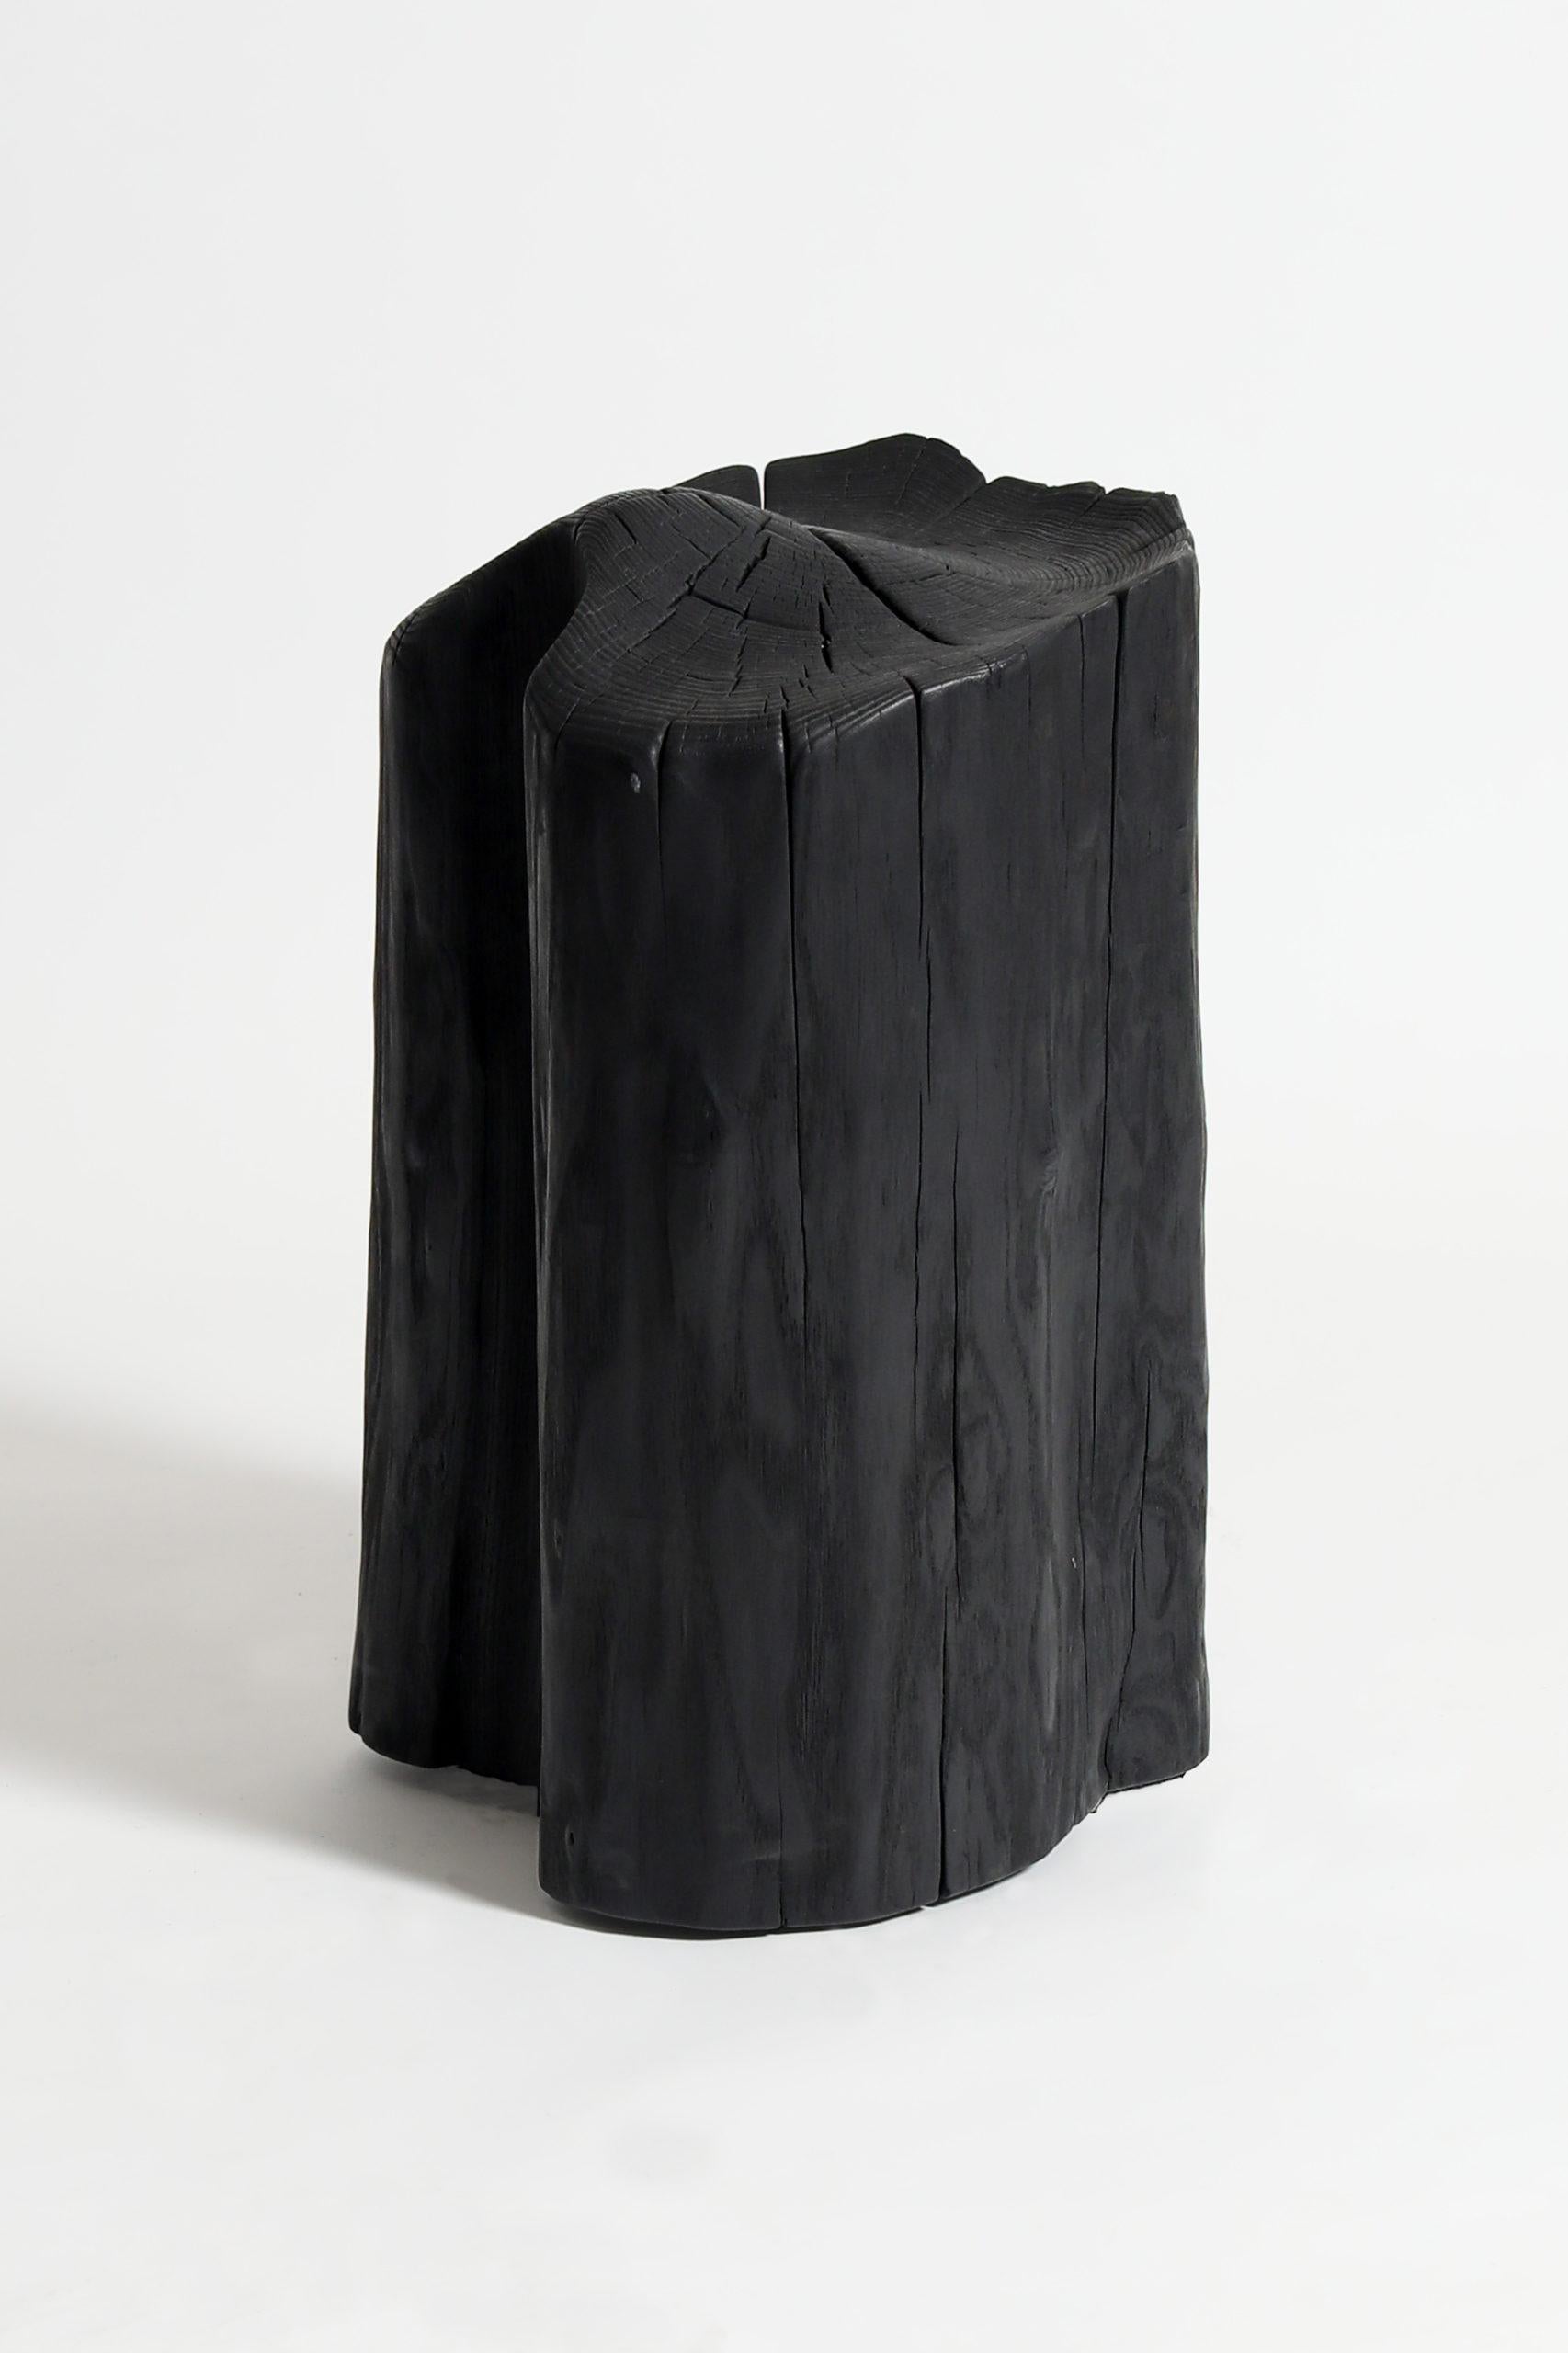 Contemporary Modern Black Wooden Stool, Burned Chunk by Jesse Sanderson for Wdstck For Sale